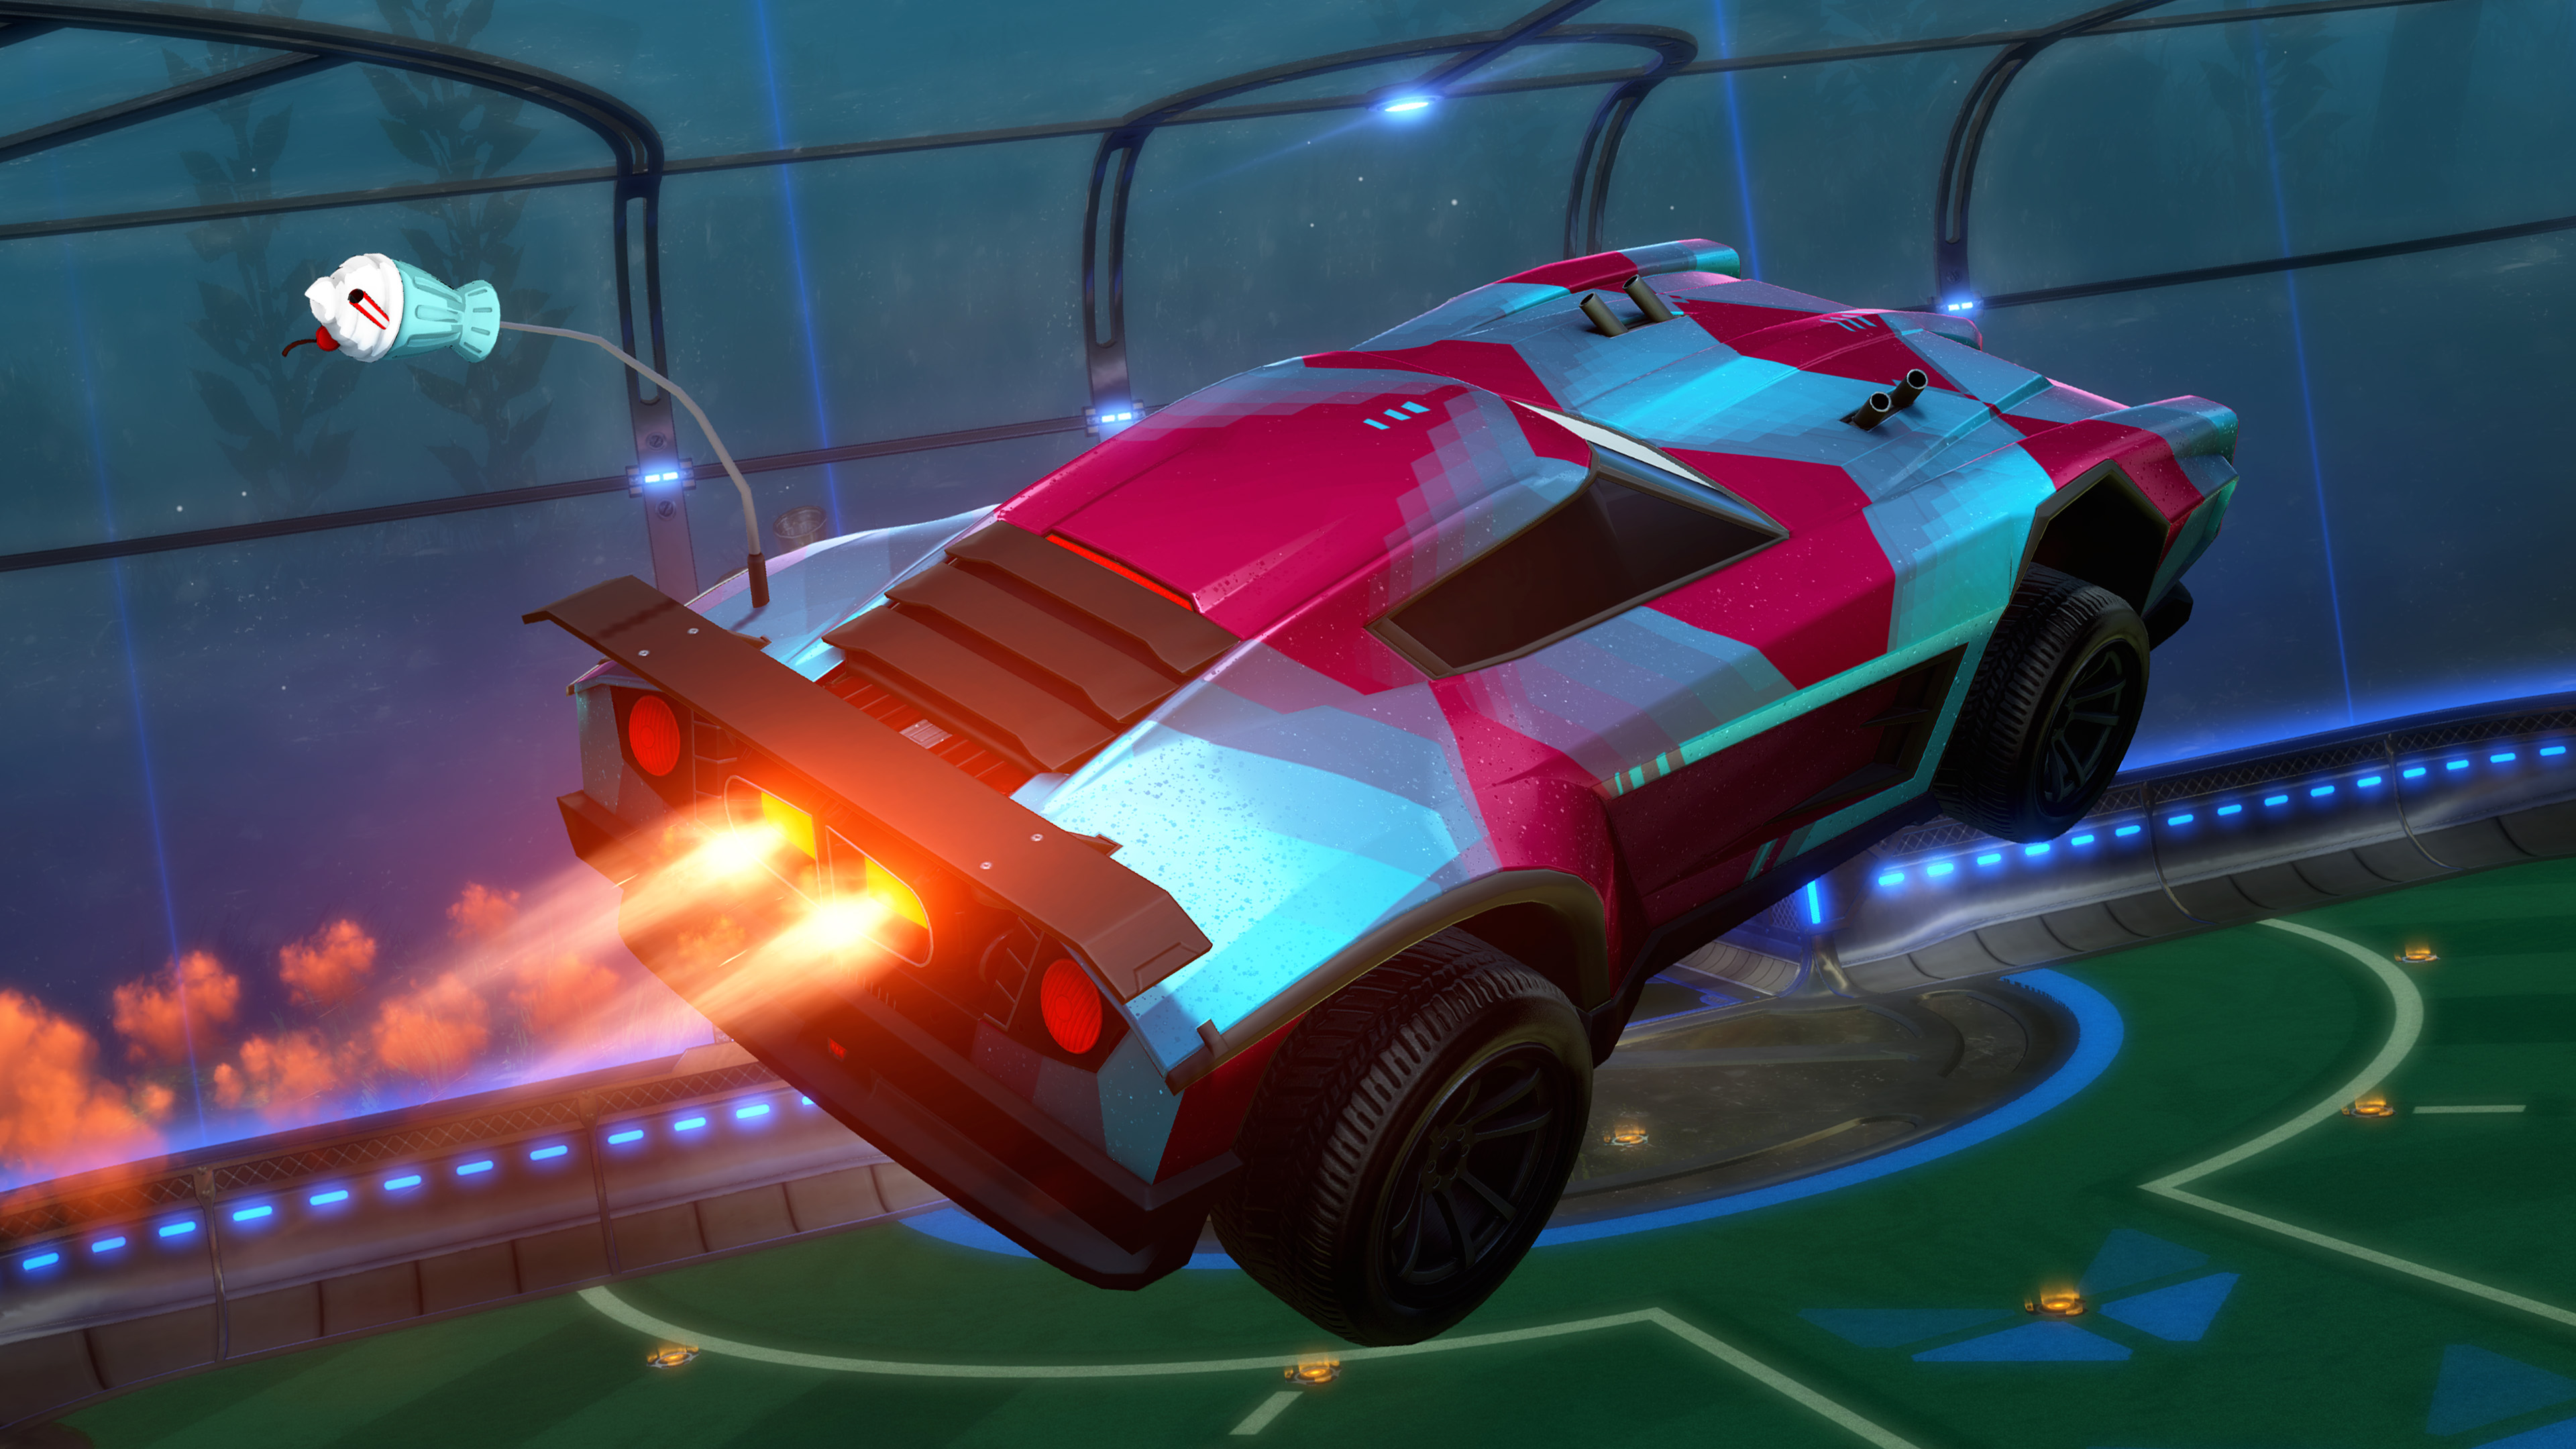 Rocket League v2.36 Update Release: Scheduled for 3/05, Platforms include Xbox, PlayStation, Steam, and more